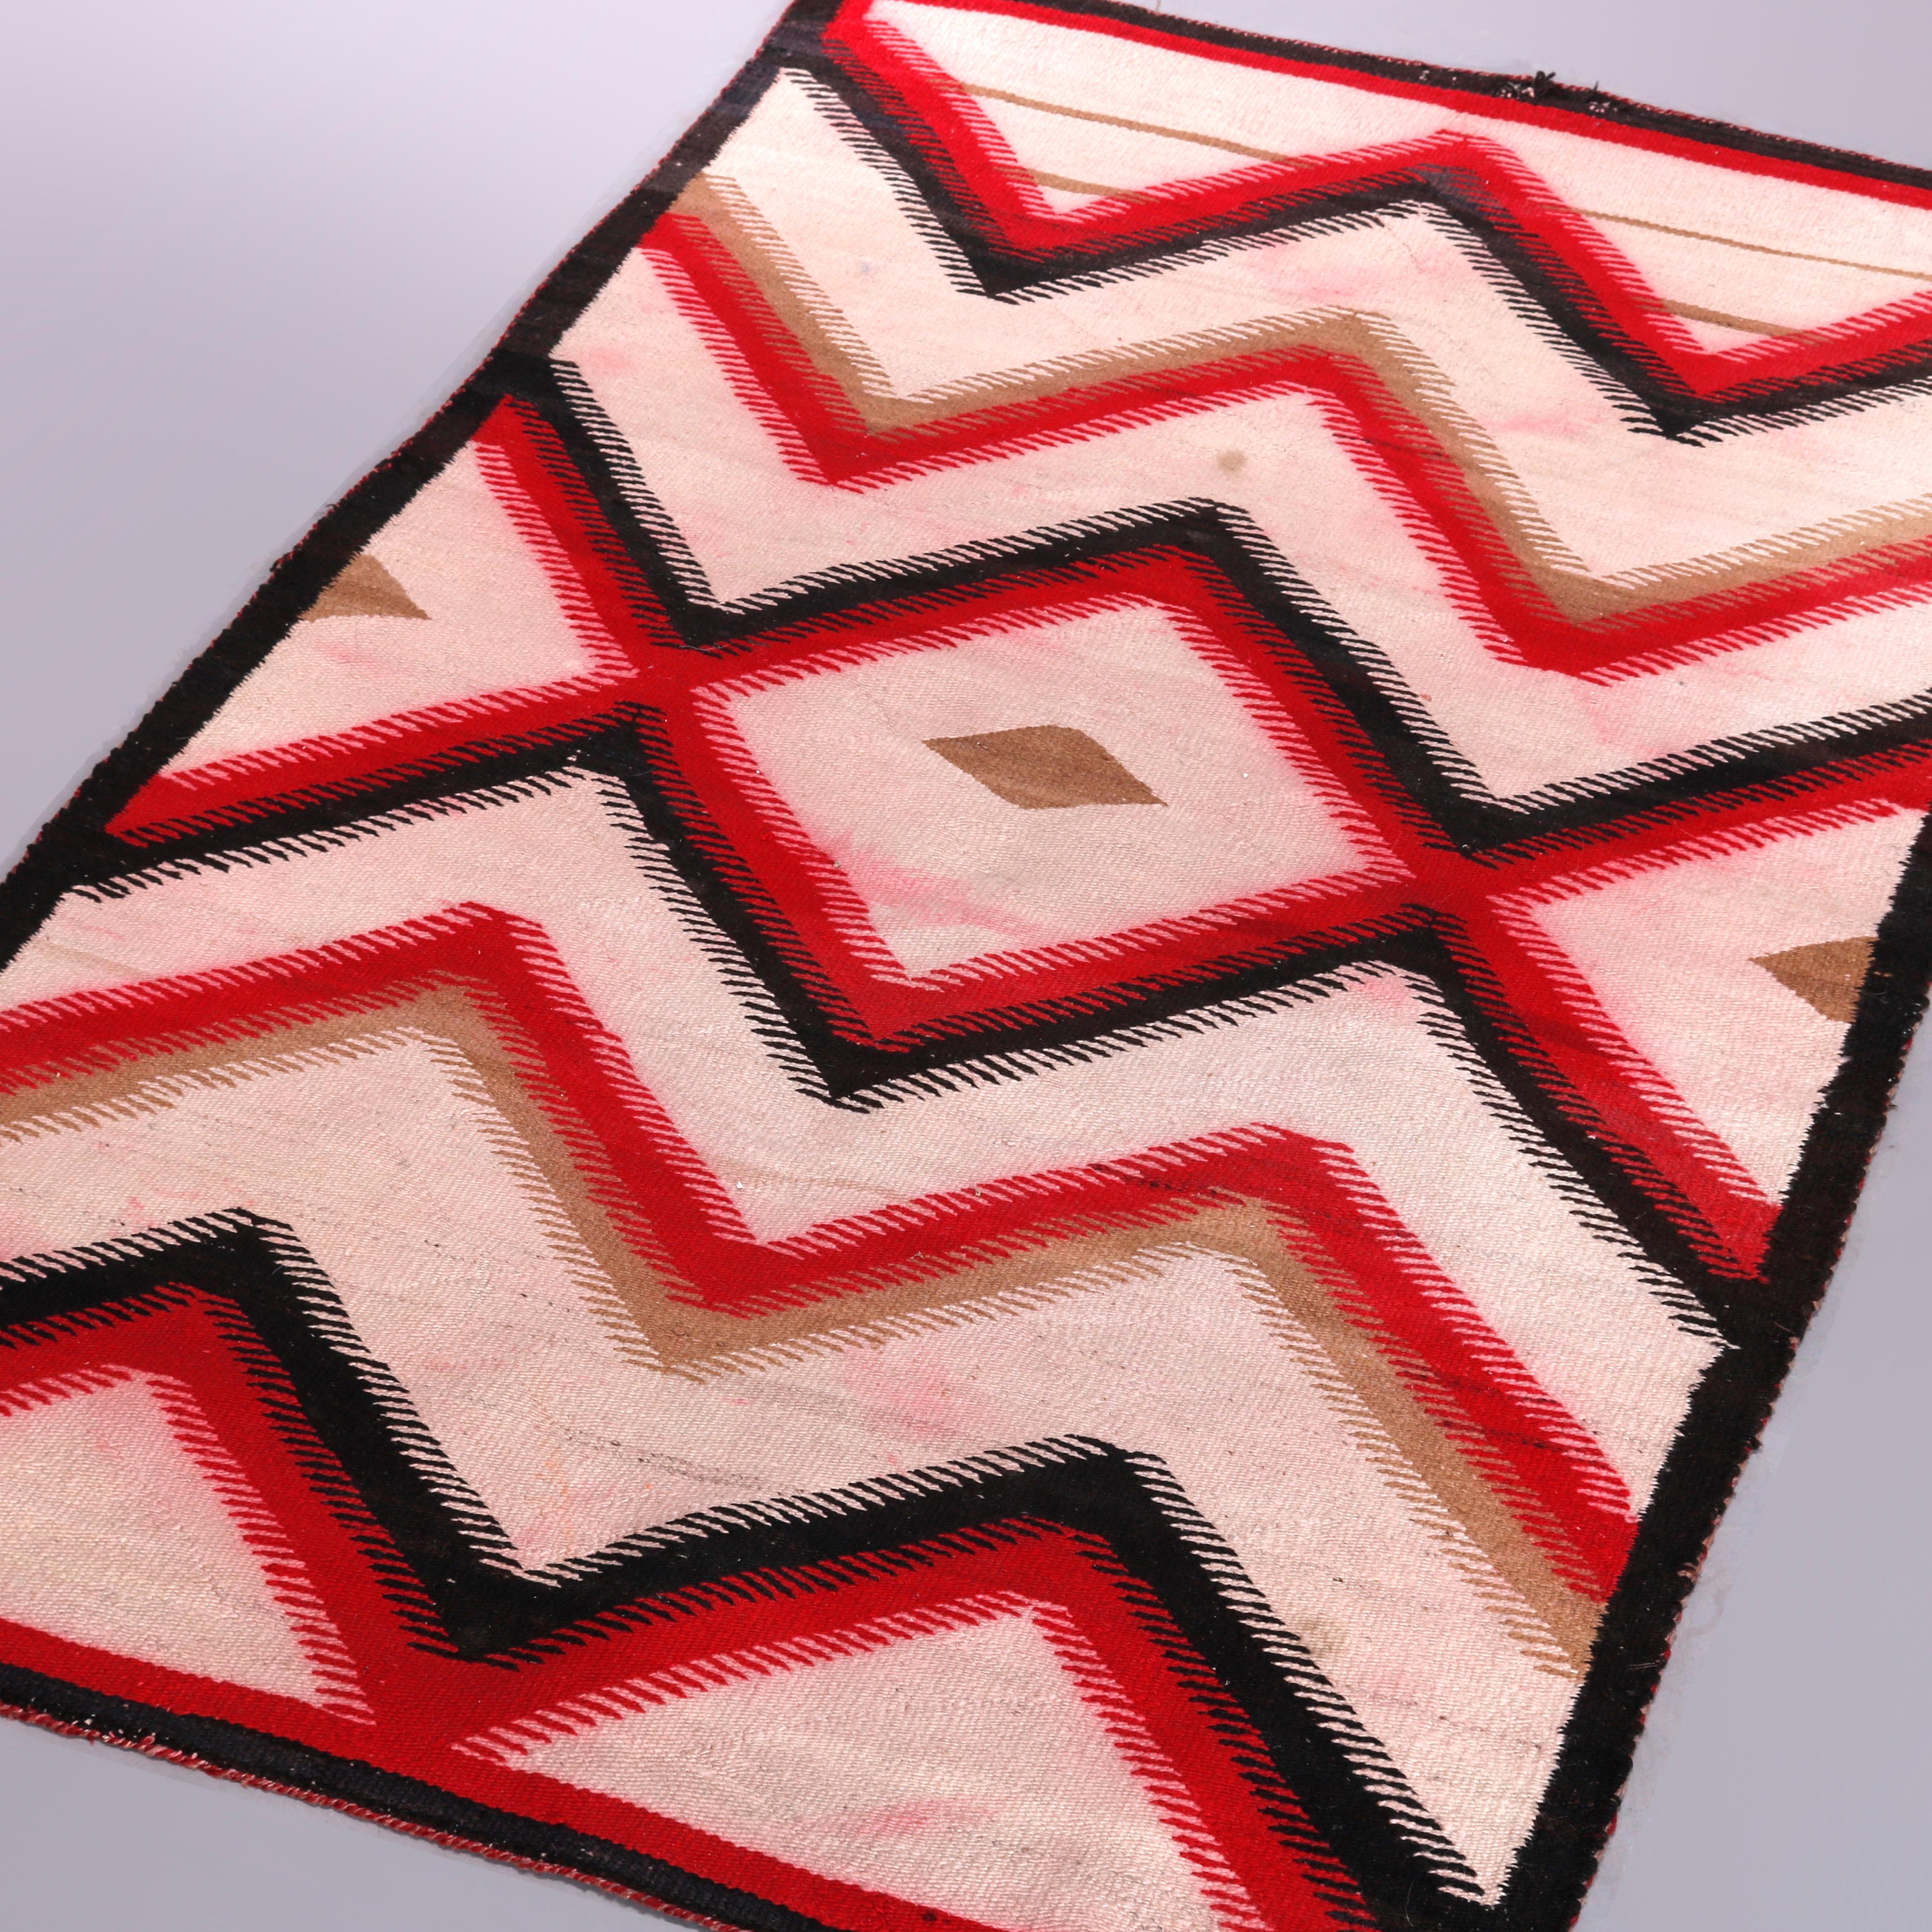 A vintage American Indian rug in the manner of Ganado Navajo weaving offers red, black and beige chevron design, 20th century

Measures: 58.5